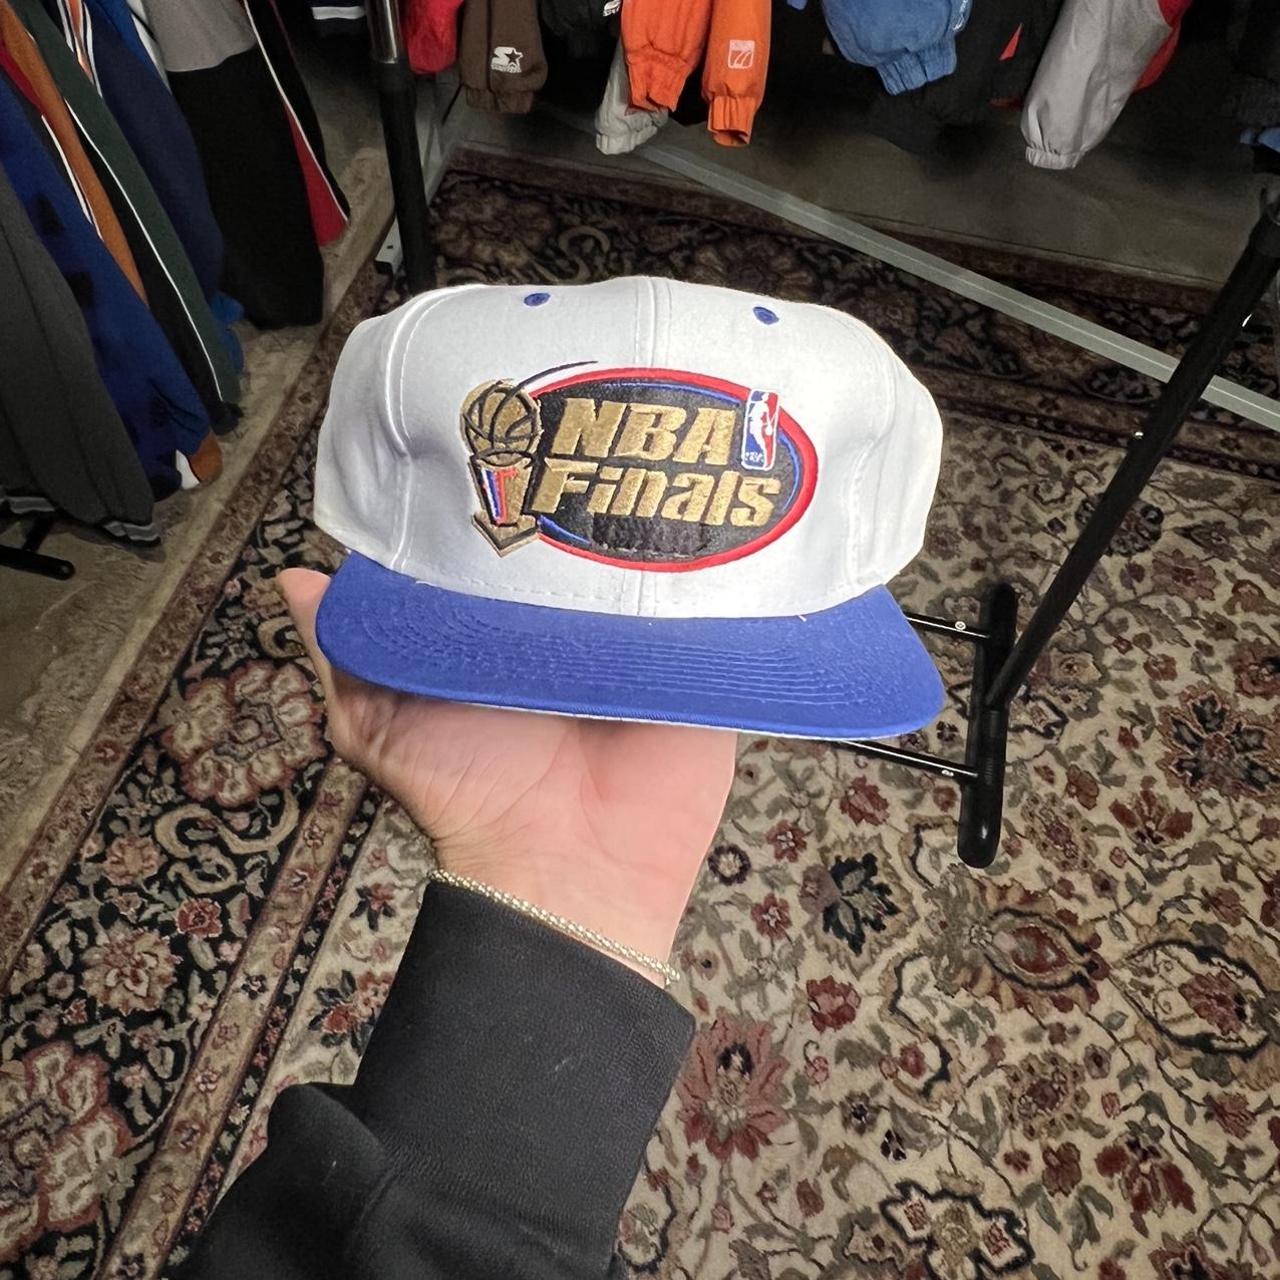 NBA Men's White and Blue Hat